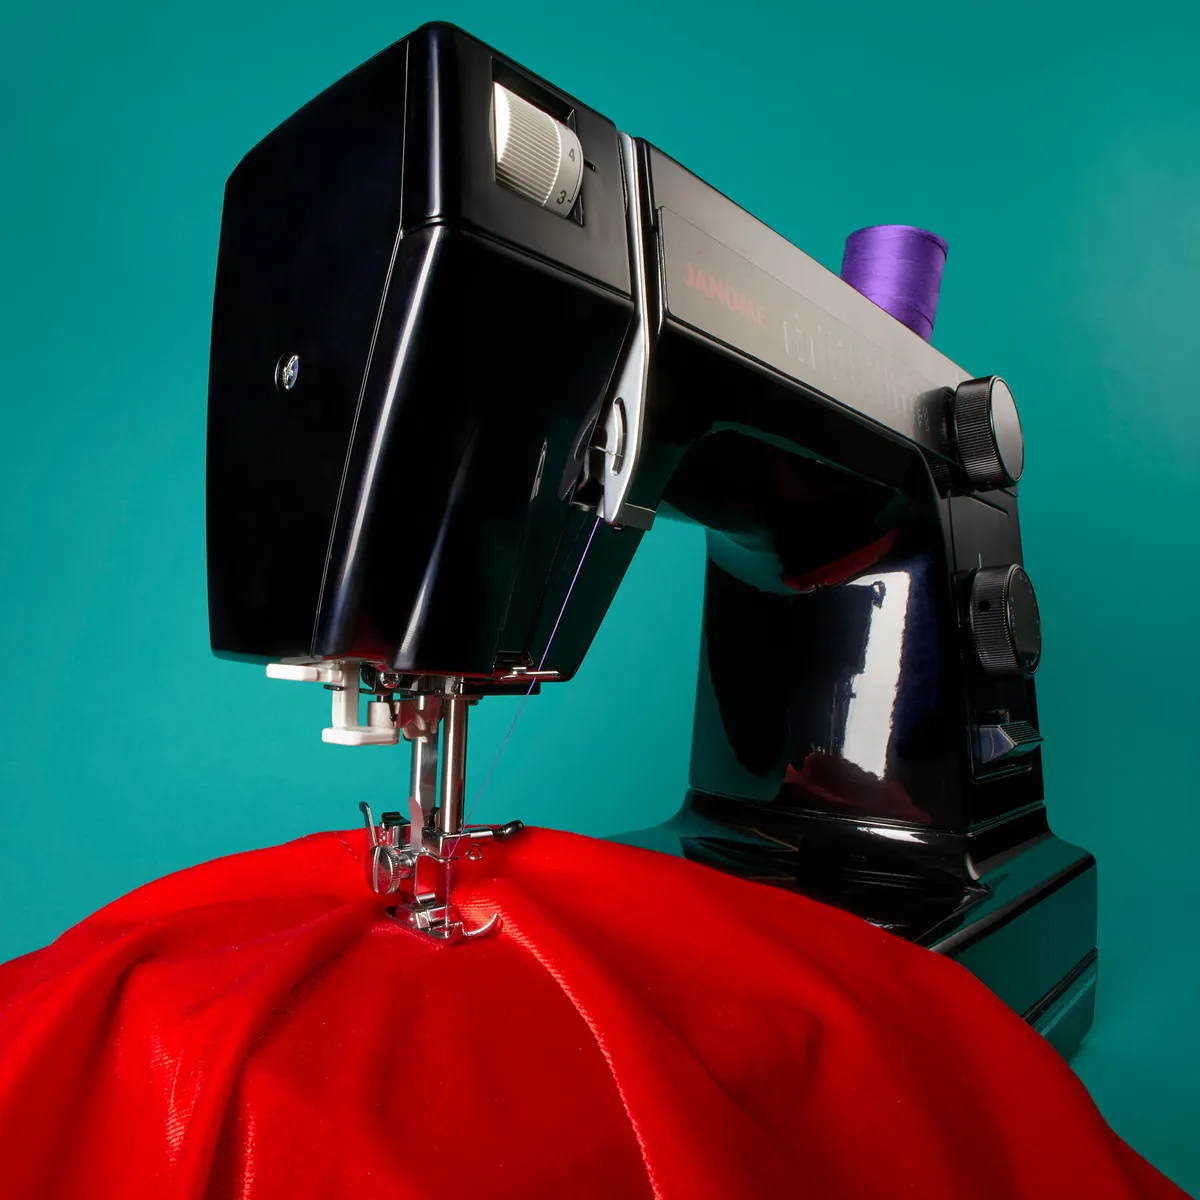 Best sewing and embroidery machine for beginners